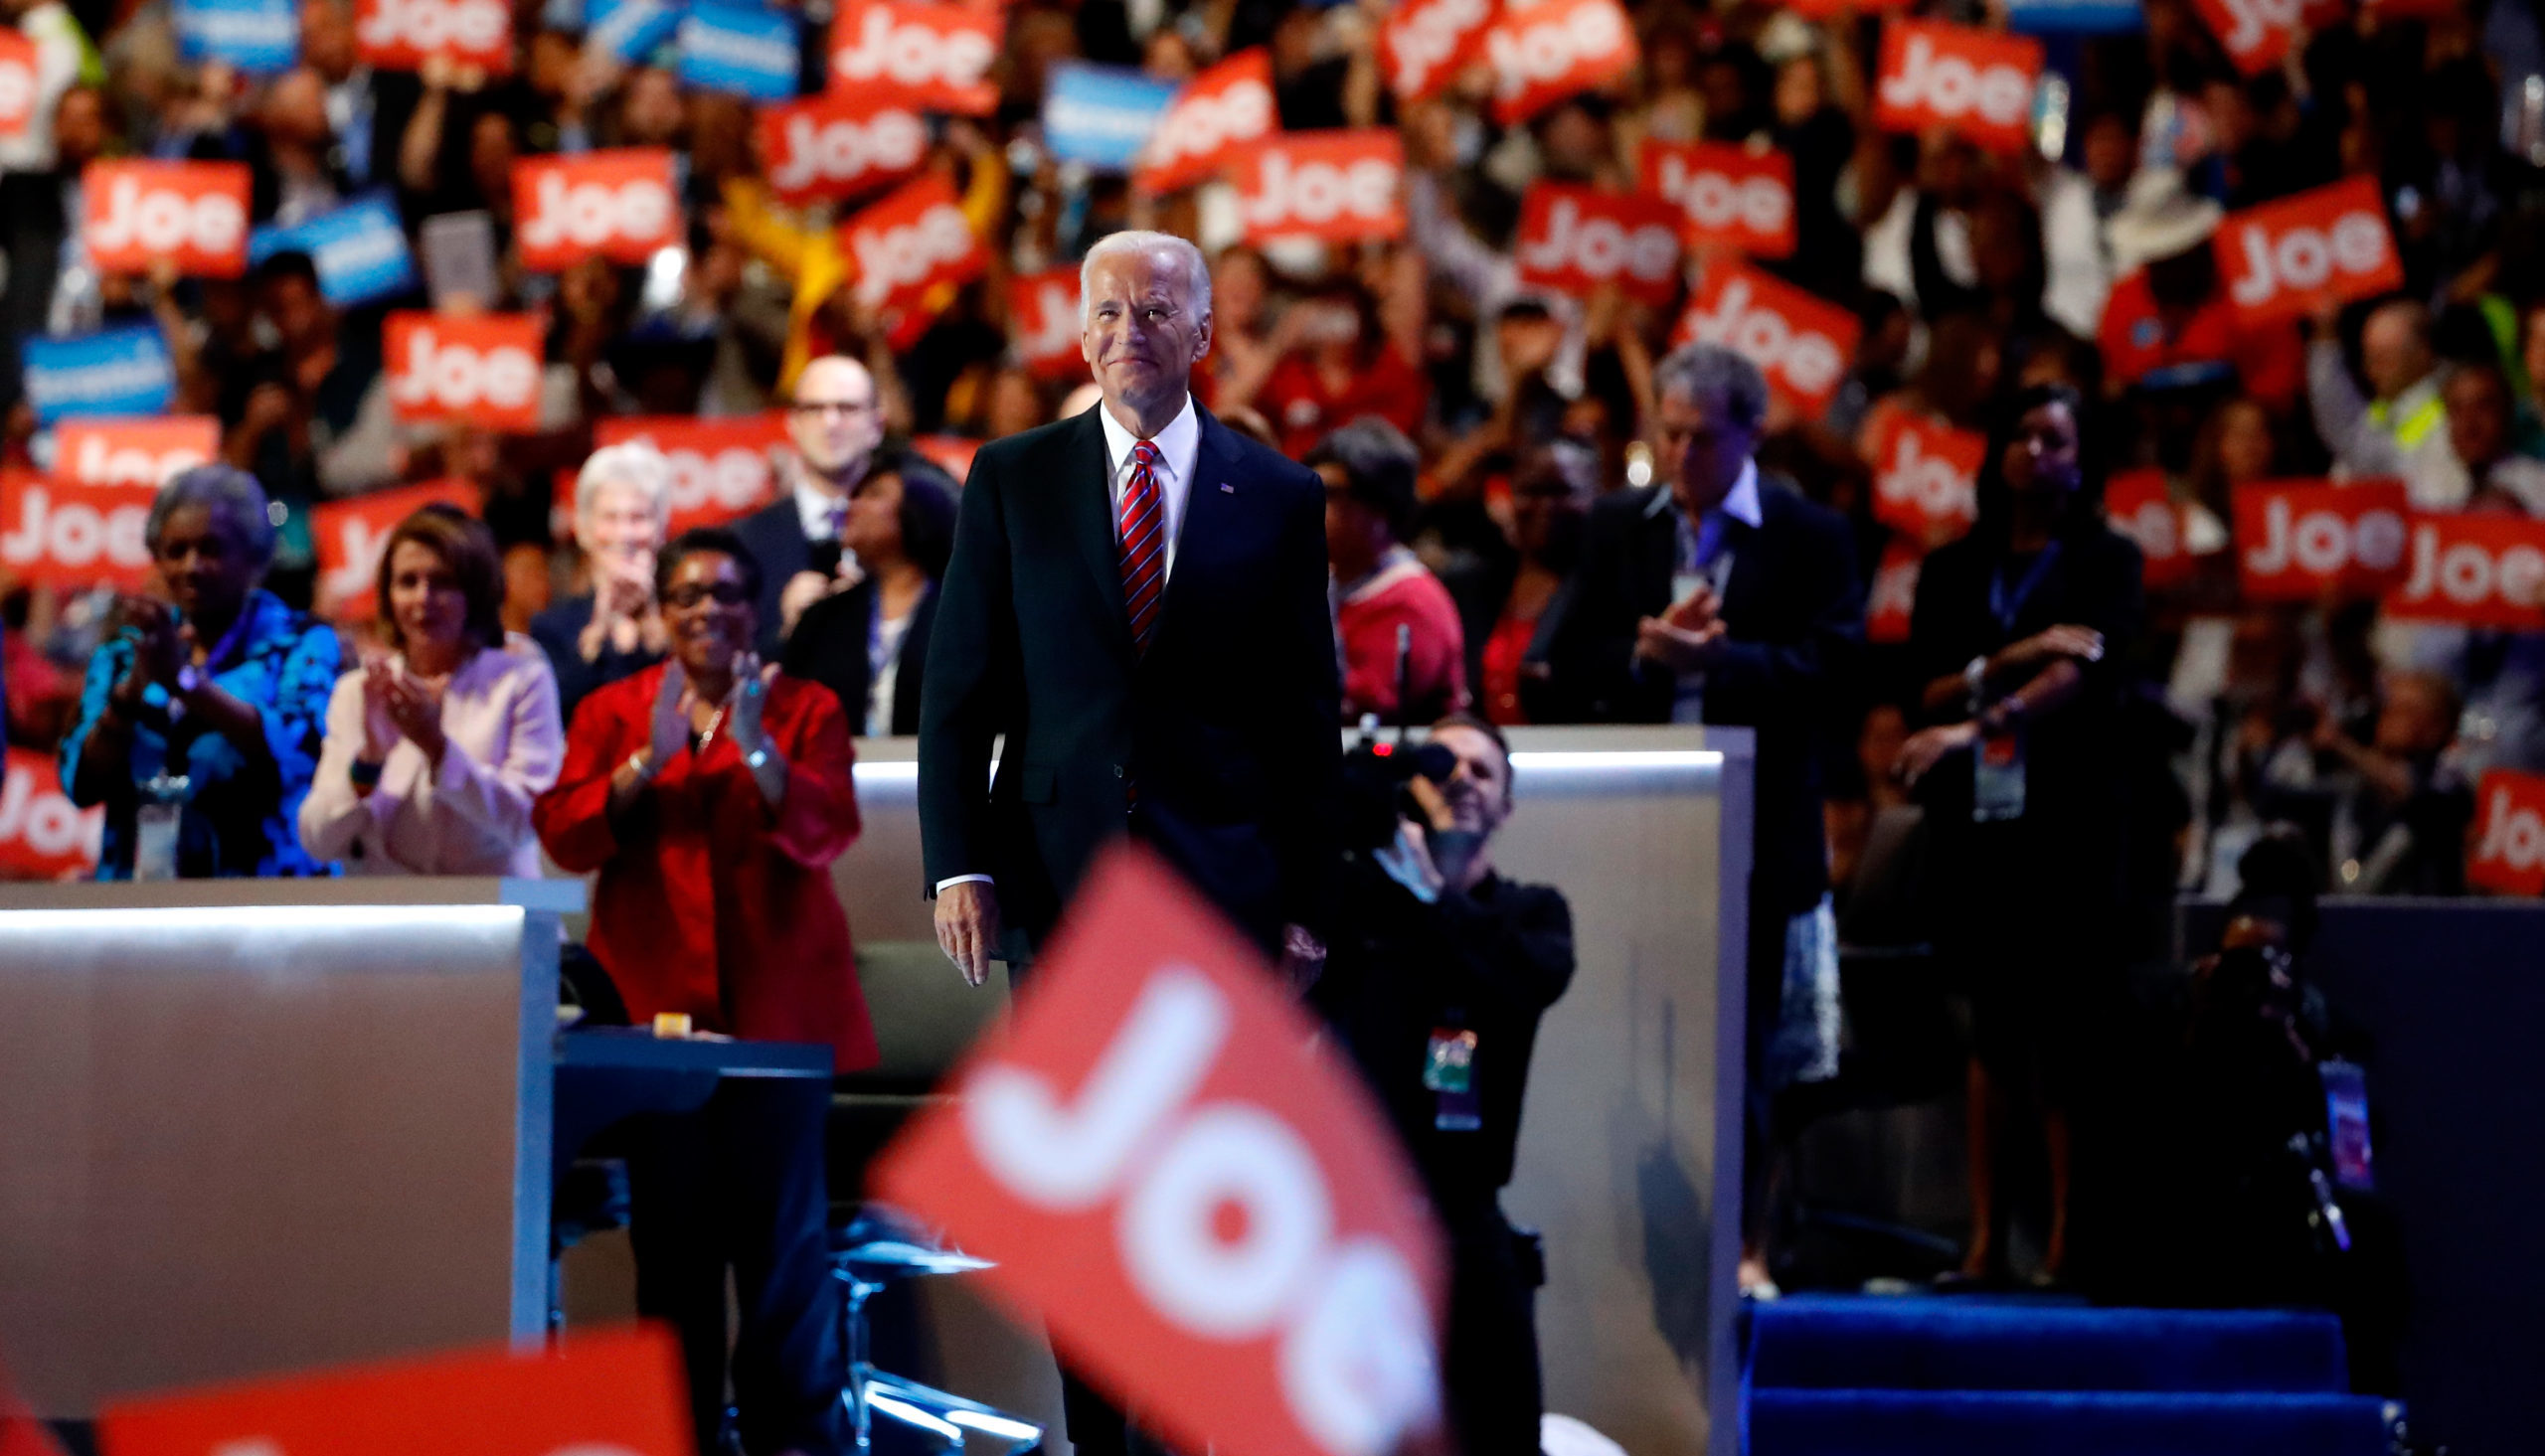 PHILADELPHIA, PA - JULY 27: US Vice President Joe Biden arrives on stage to deliver remarks on the third day of the Democratic National Convention at the Wells Fargo Center, July 27, 2016 in Philadelphia, Pennsylvania. Democratic presidential candidate Hillary Clinton received the number of votes needed to secure the party's nomination. An estimated 50,000 people are expected in Philadelphia, including hundreds of protesters and members of the media. The four-day Democratic National Convention kicked off July 25. (Photo by Aaron P. Bernstein/Getty Images)